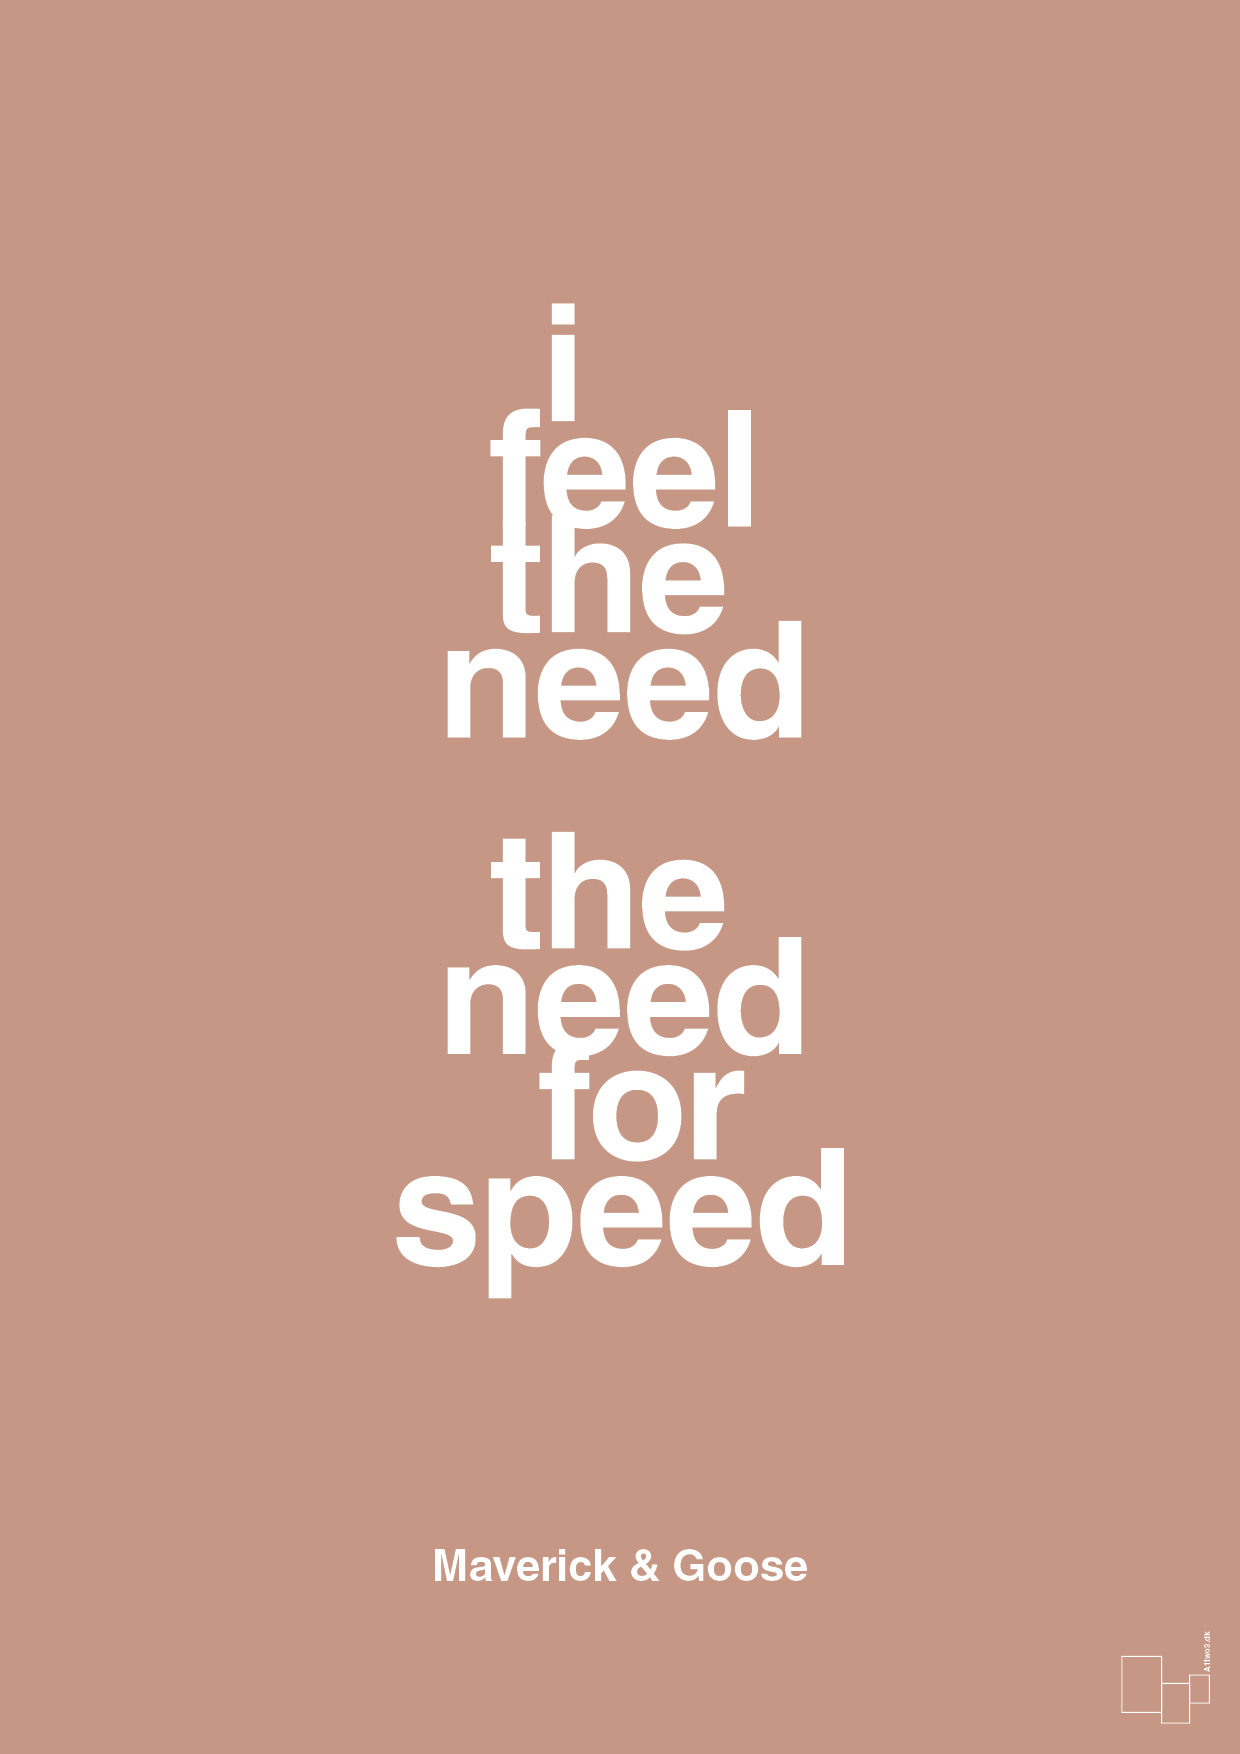 i feel the need the need for speed - Plakat med Citater i Powder